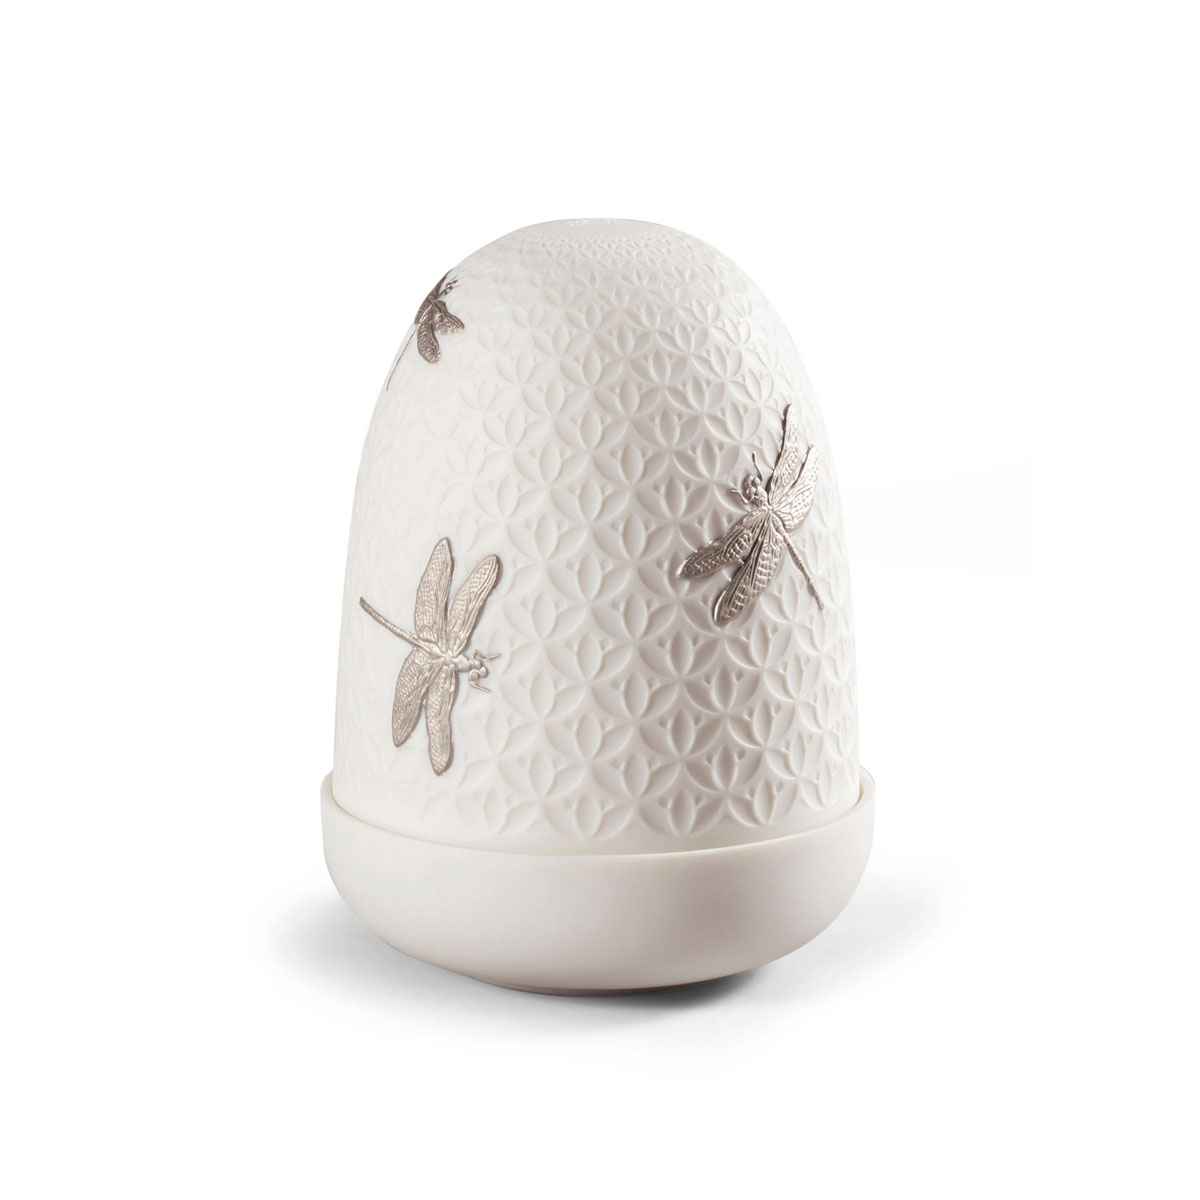 Lladro Light And Fragrance, Dragonflies Dome Table Lamp